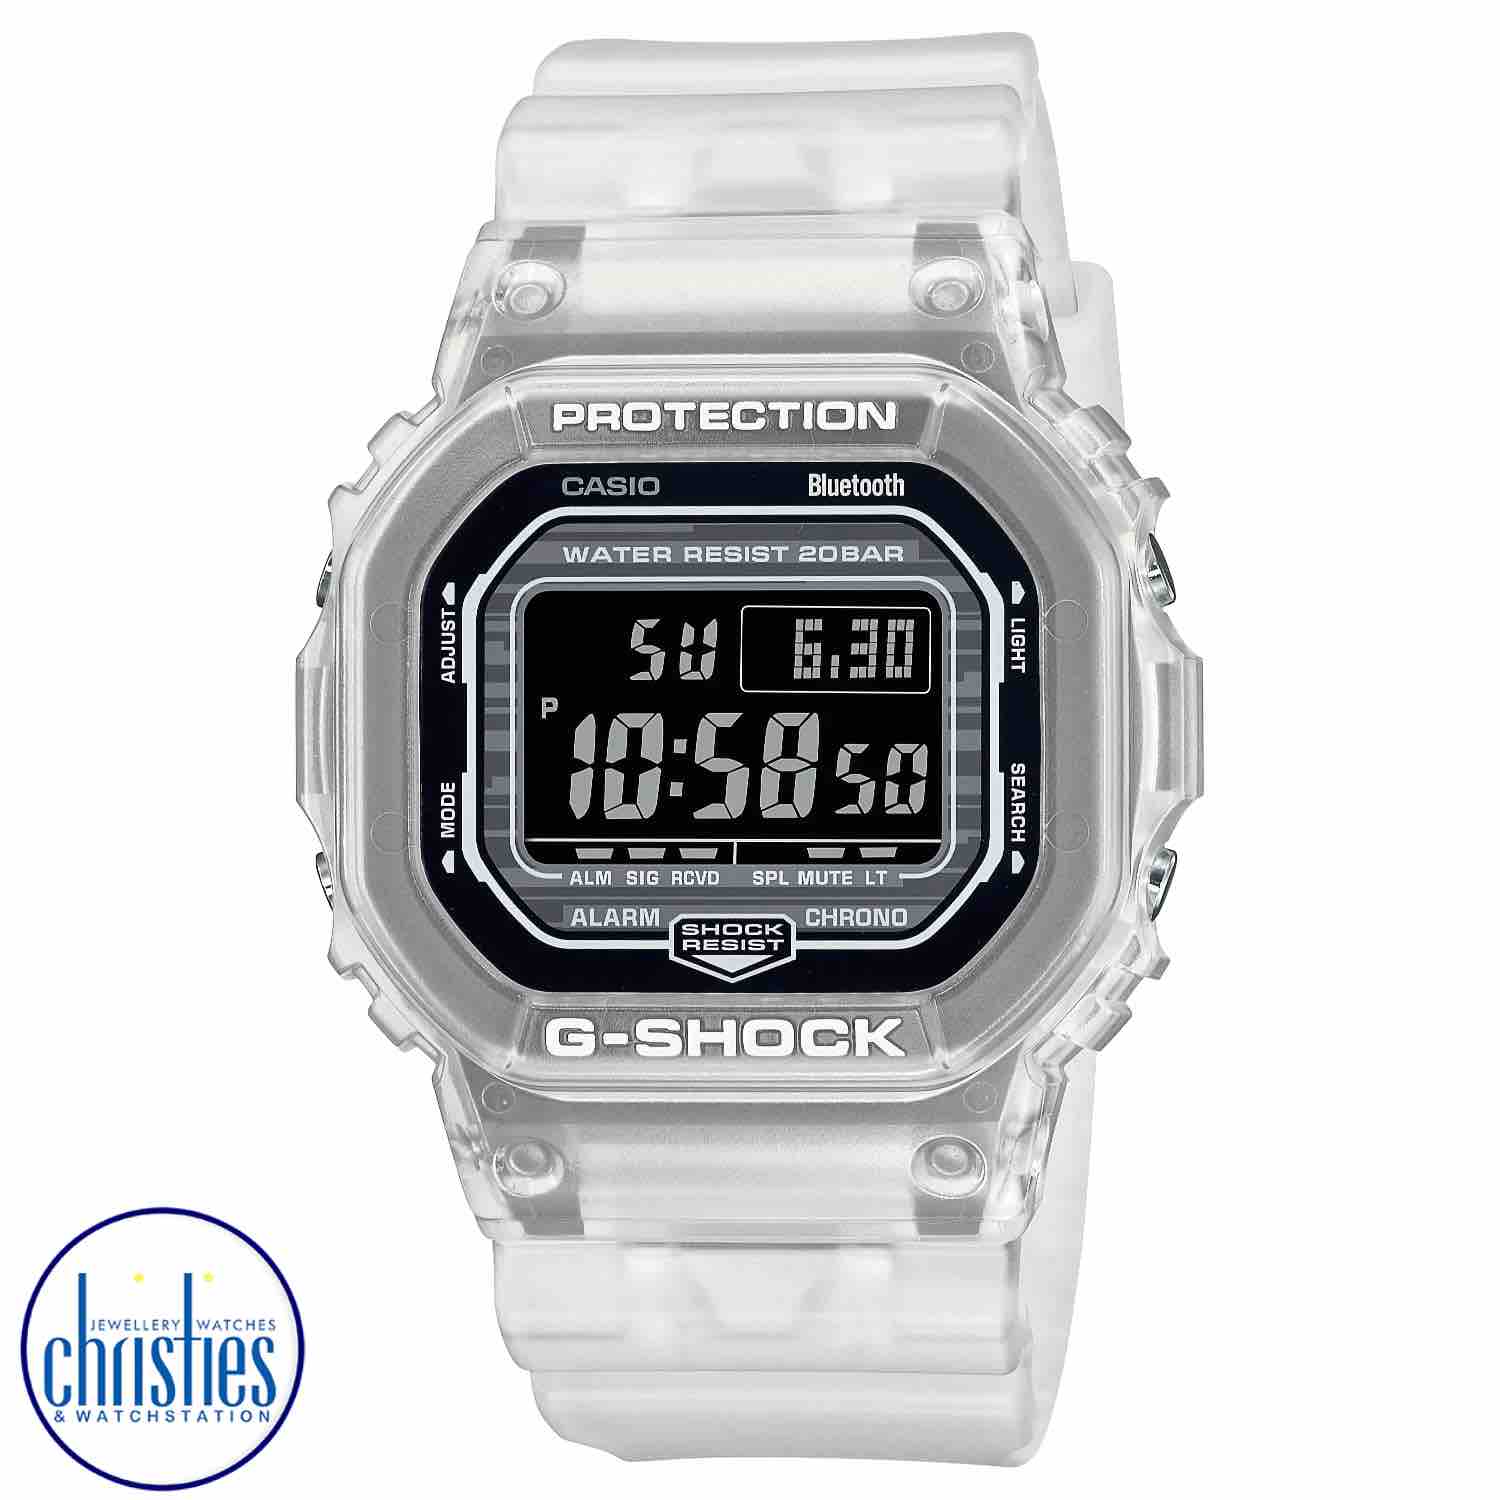 DWB5600G-7D Casio G-SHOCK  Bluetooth Watch. Introducing the DW-B5600 line of G-SHOCK watches — Featuring a new toughness-driven design and Smartphone Link functionality, bold colour schemes take you from stylish urban streets. famous nz street artists